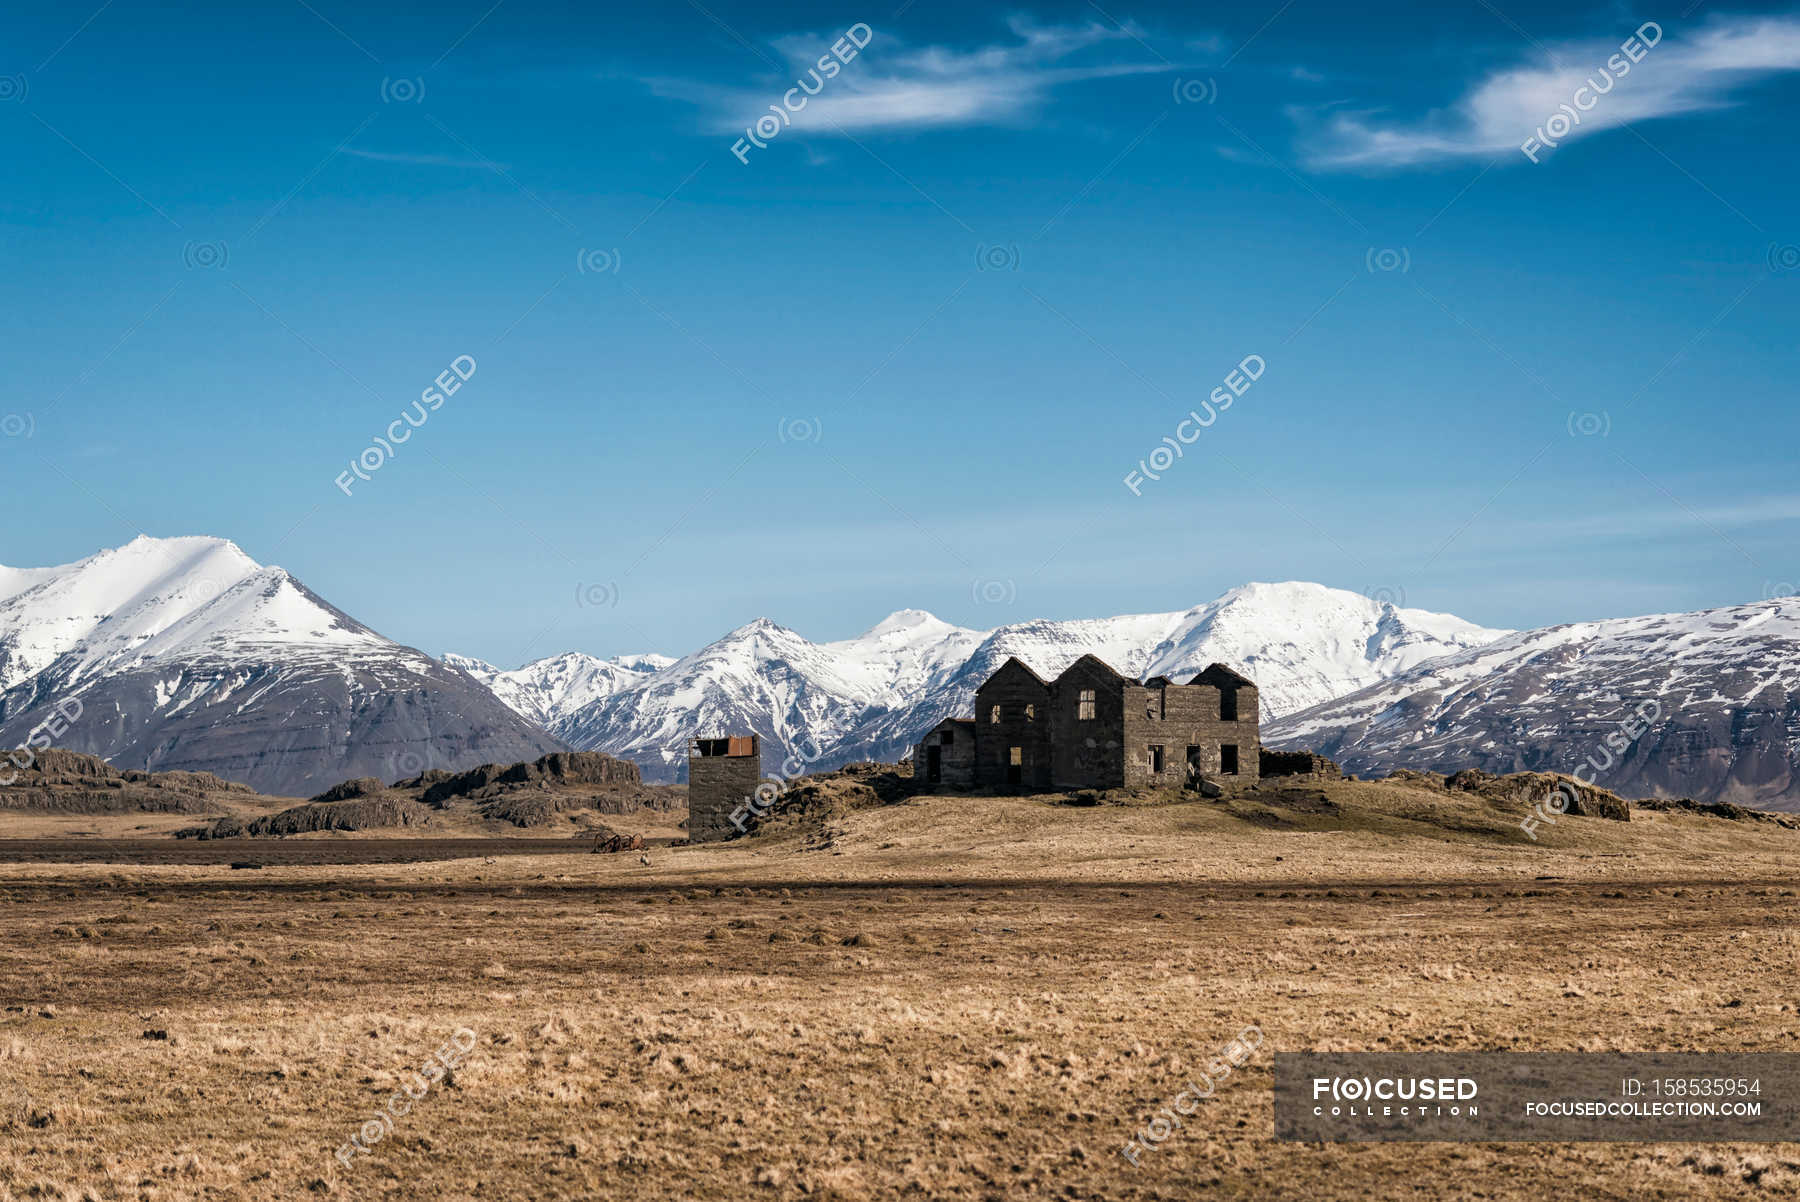 Observing view of mountain range landscape — Stock Photo | #158535954